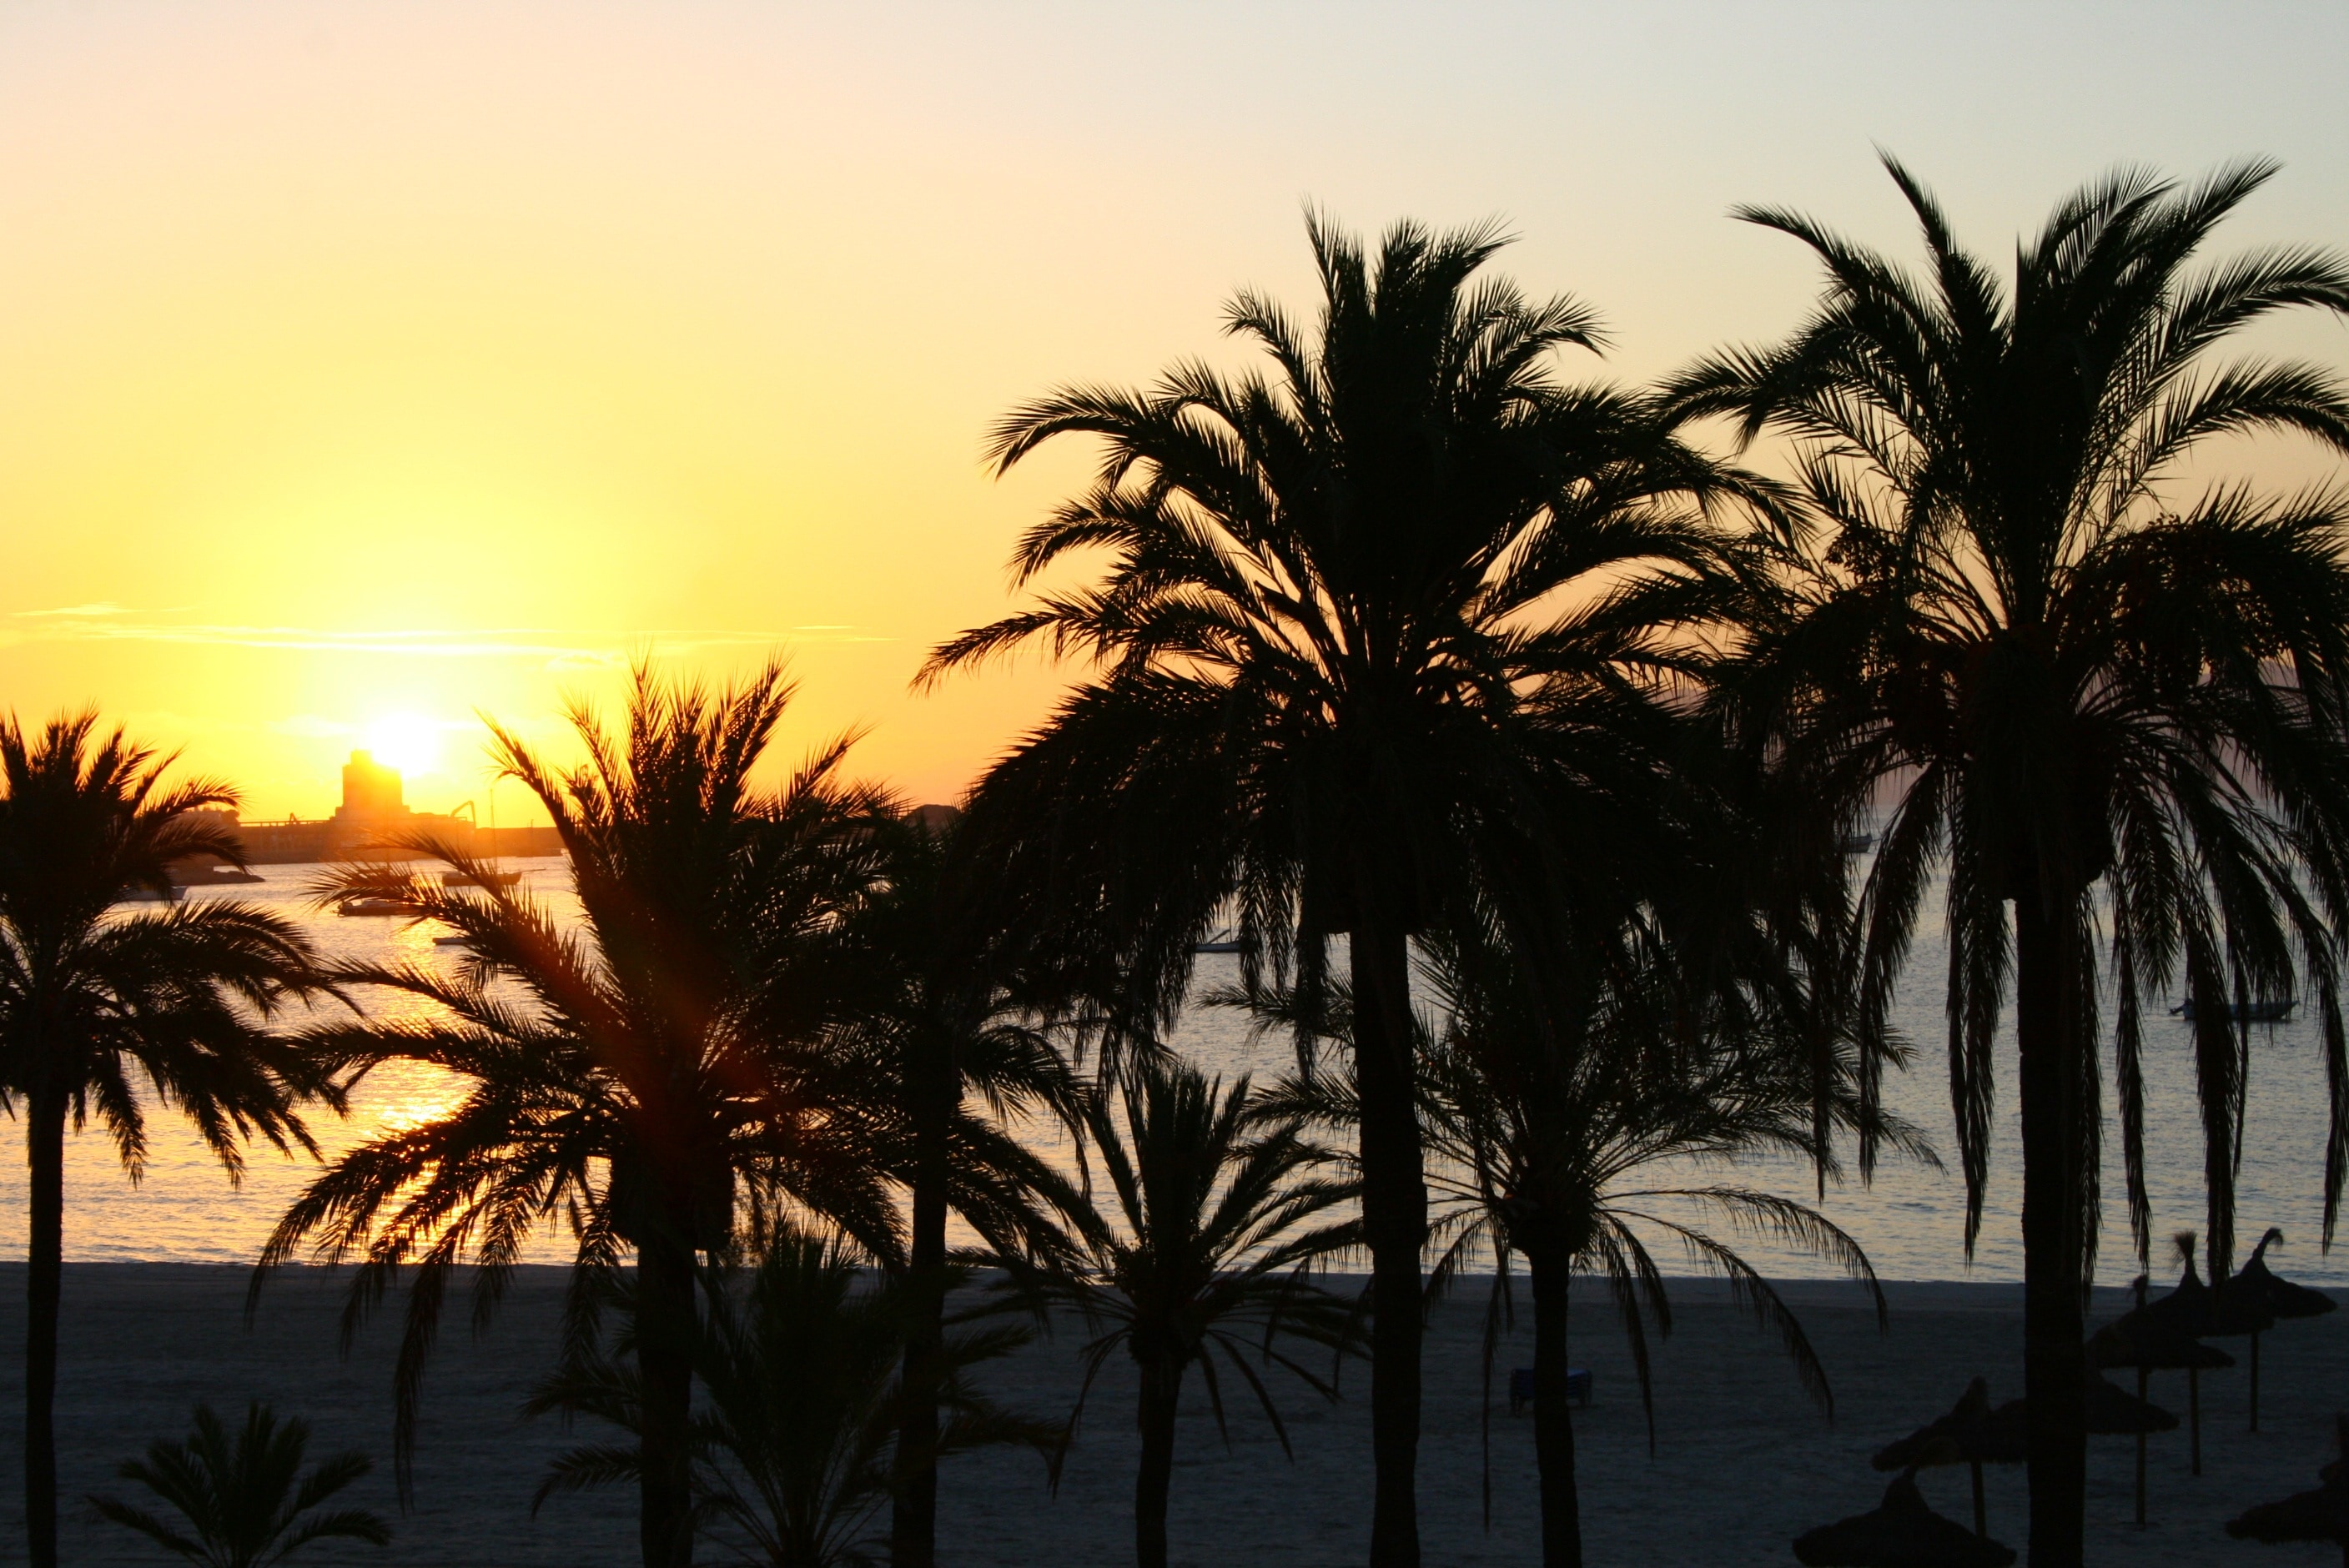 silhouette of palm trees in seashore during golden hour